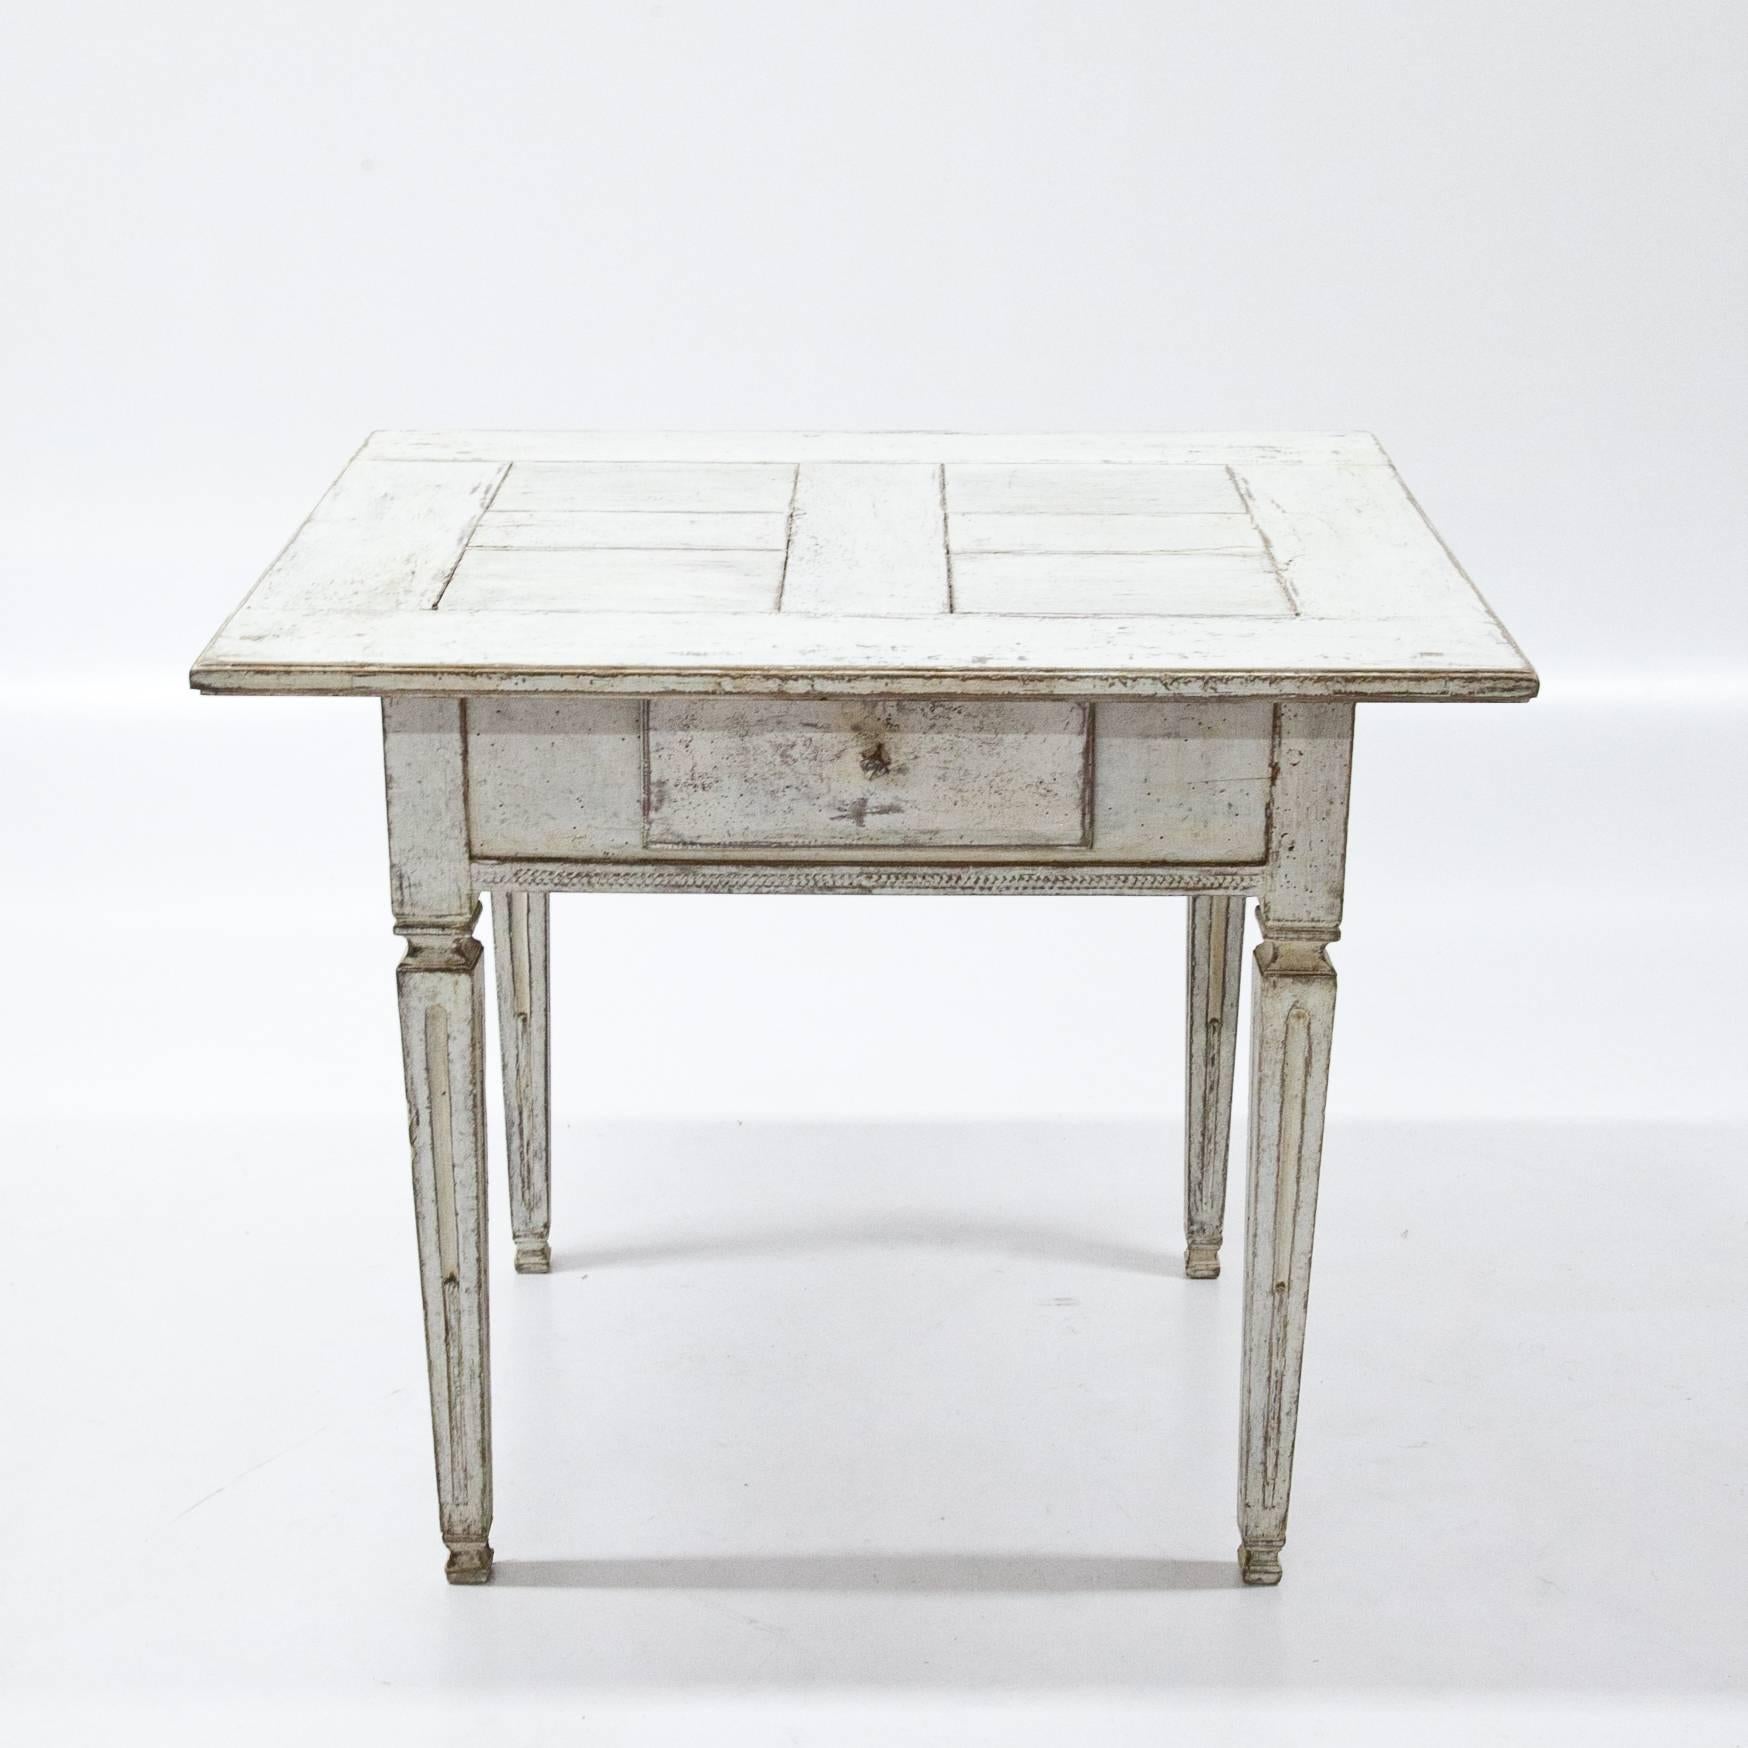 Provençal table on fluted tapered legs, with one drawer and a parqueted tabletop. The white paint has a slightly worn look giving the piece lots of character.